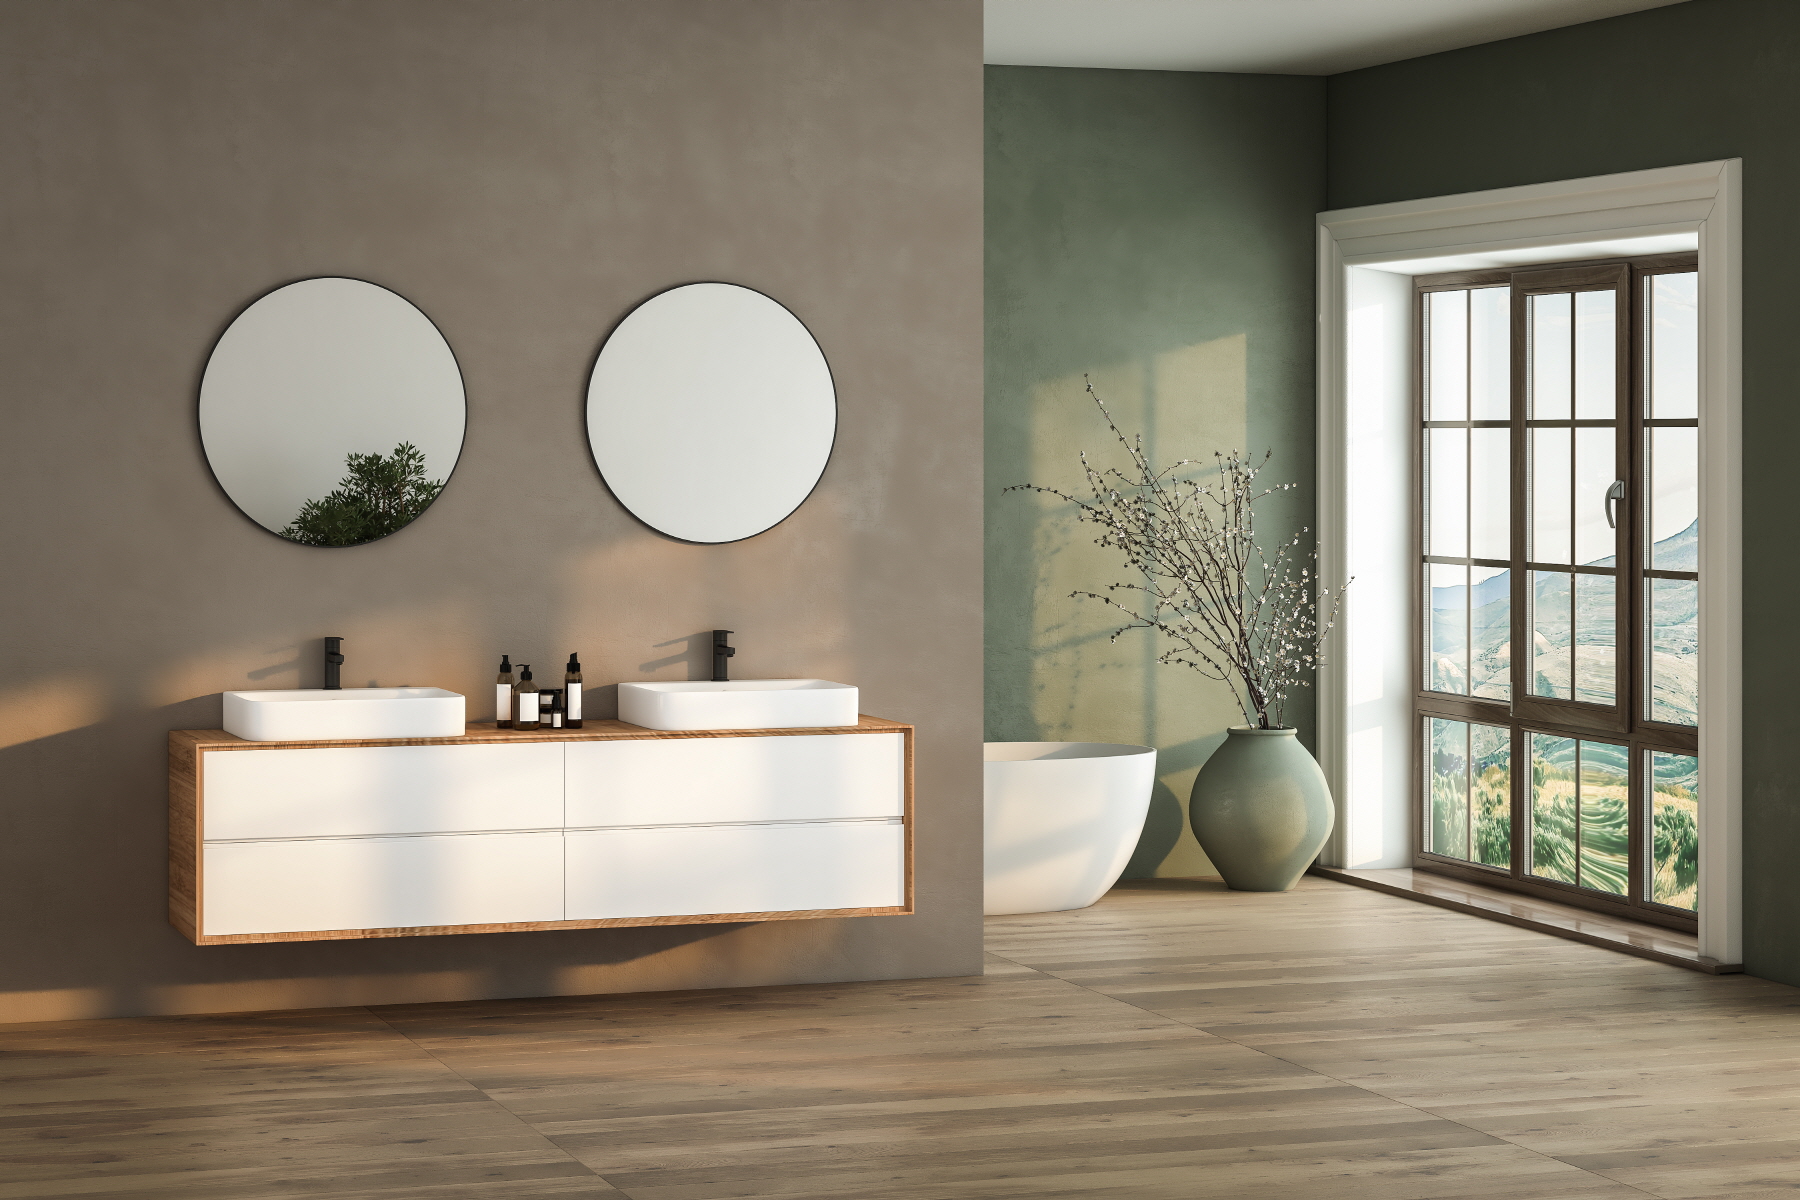 Go for earthy tones like green and brown for a refreshing, natural look in your bathroom.